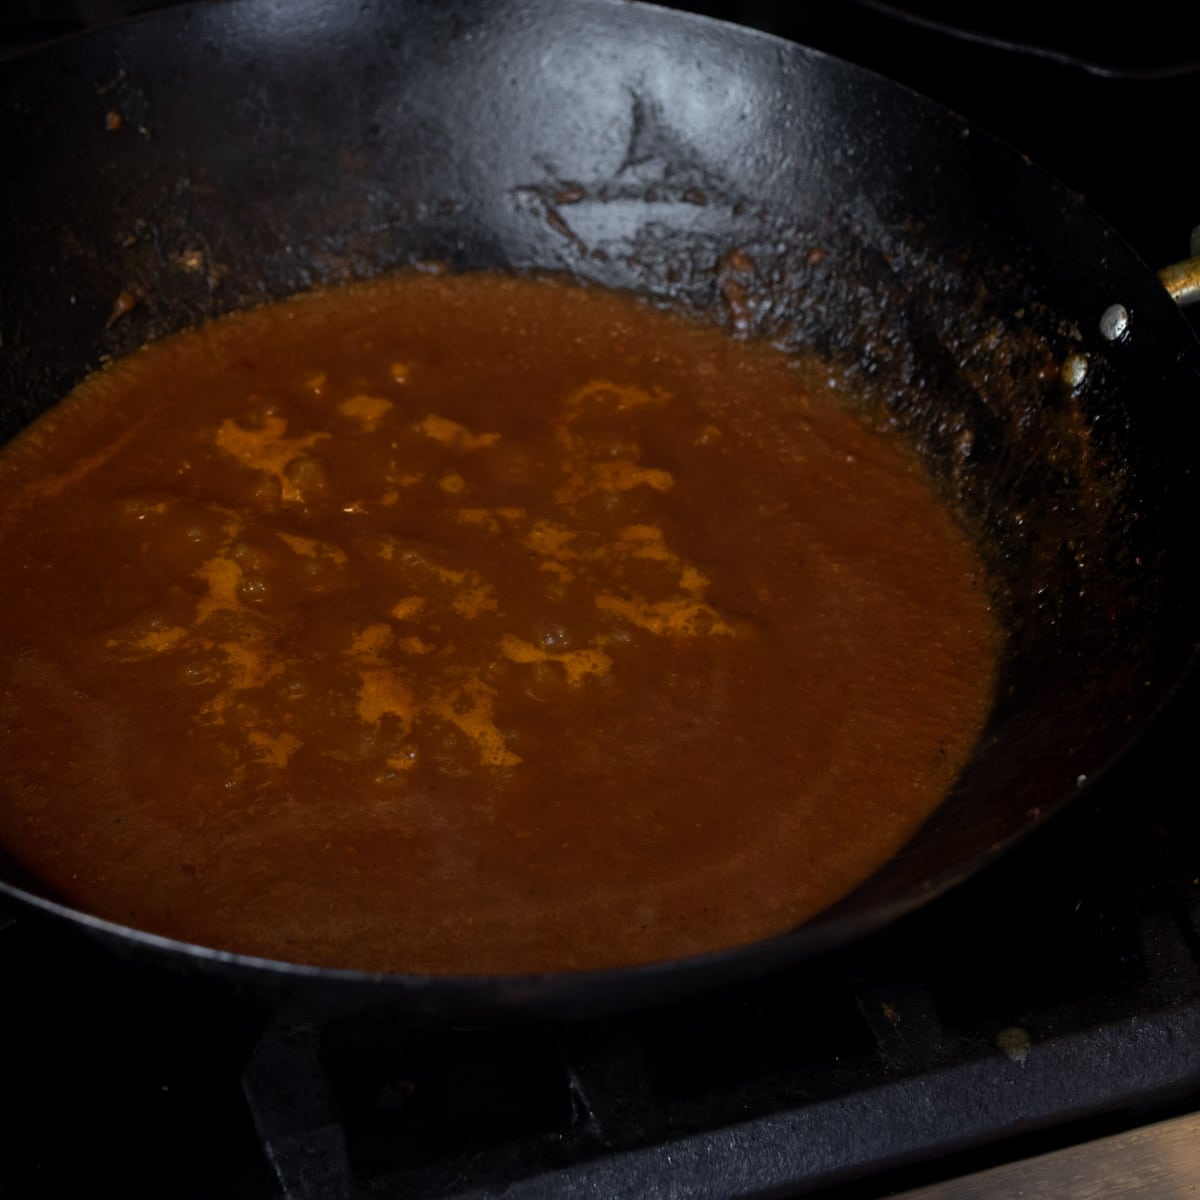 Sauce simmering with tiny bubbles visible.